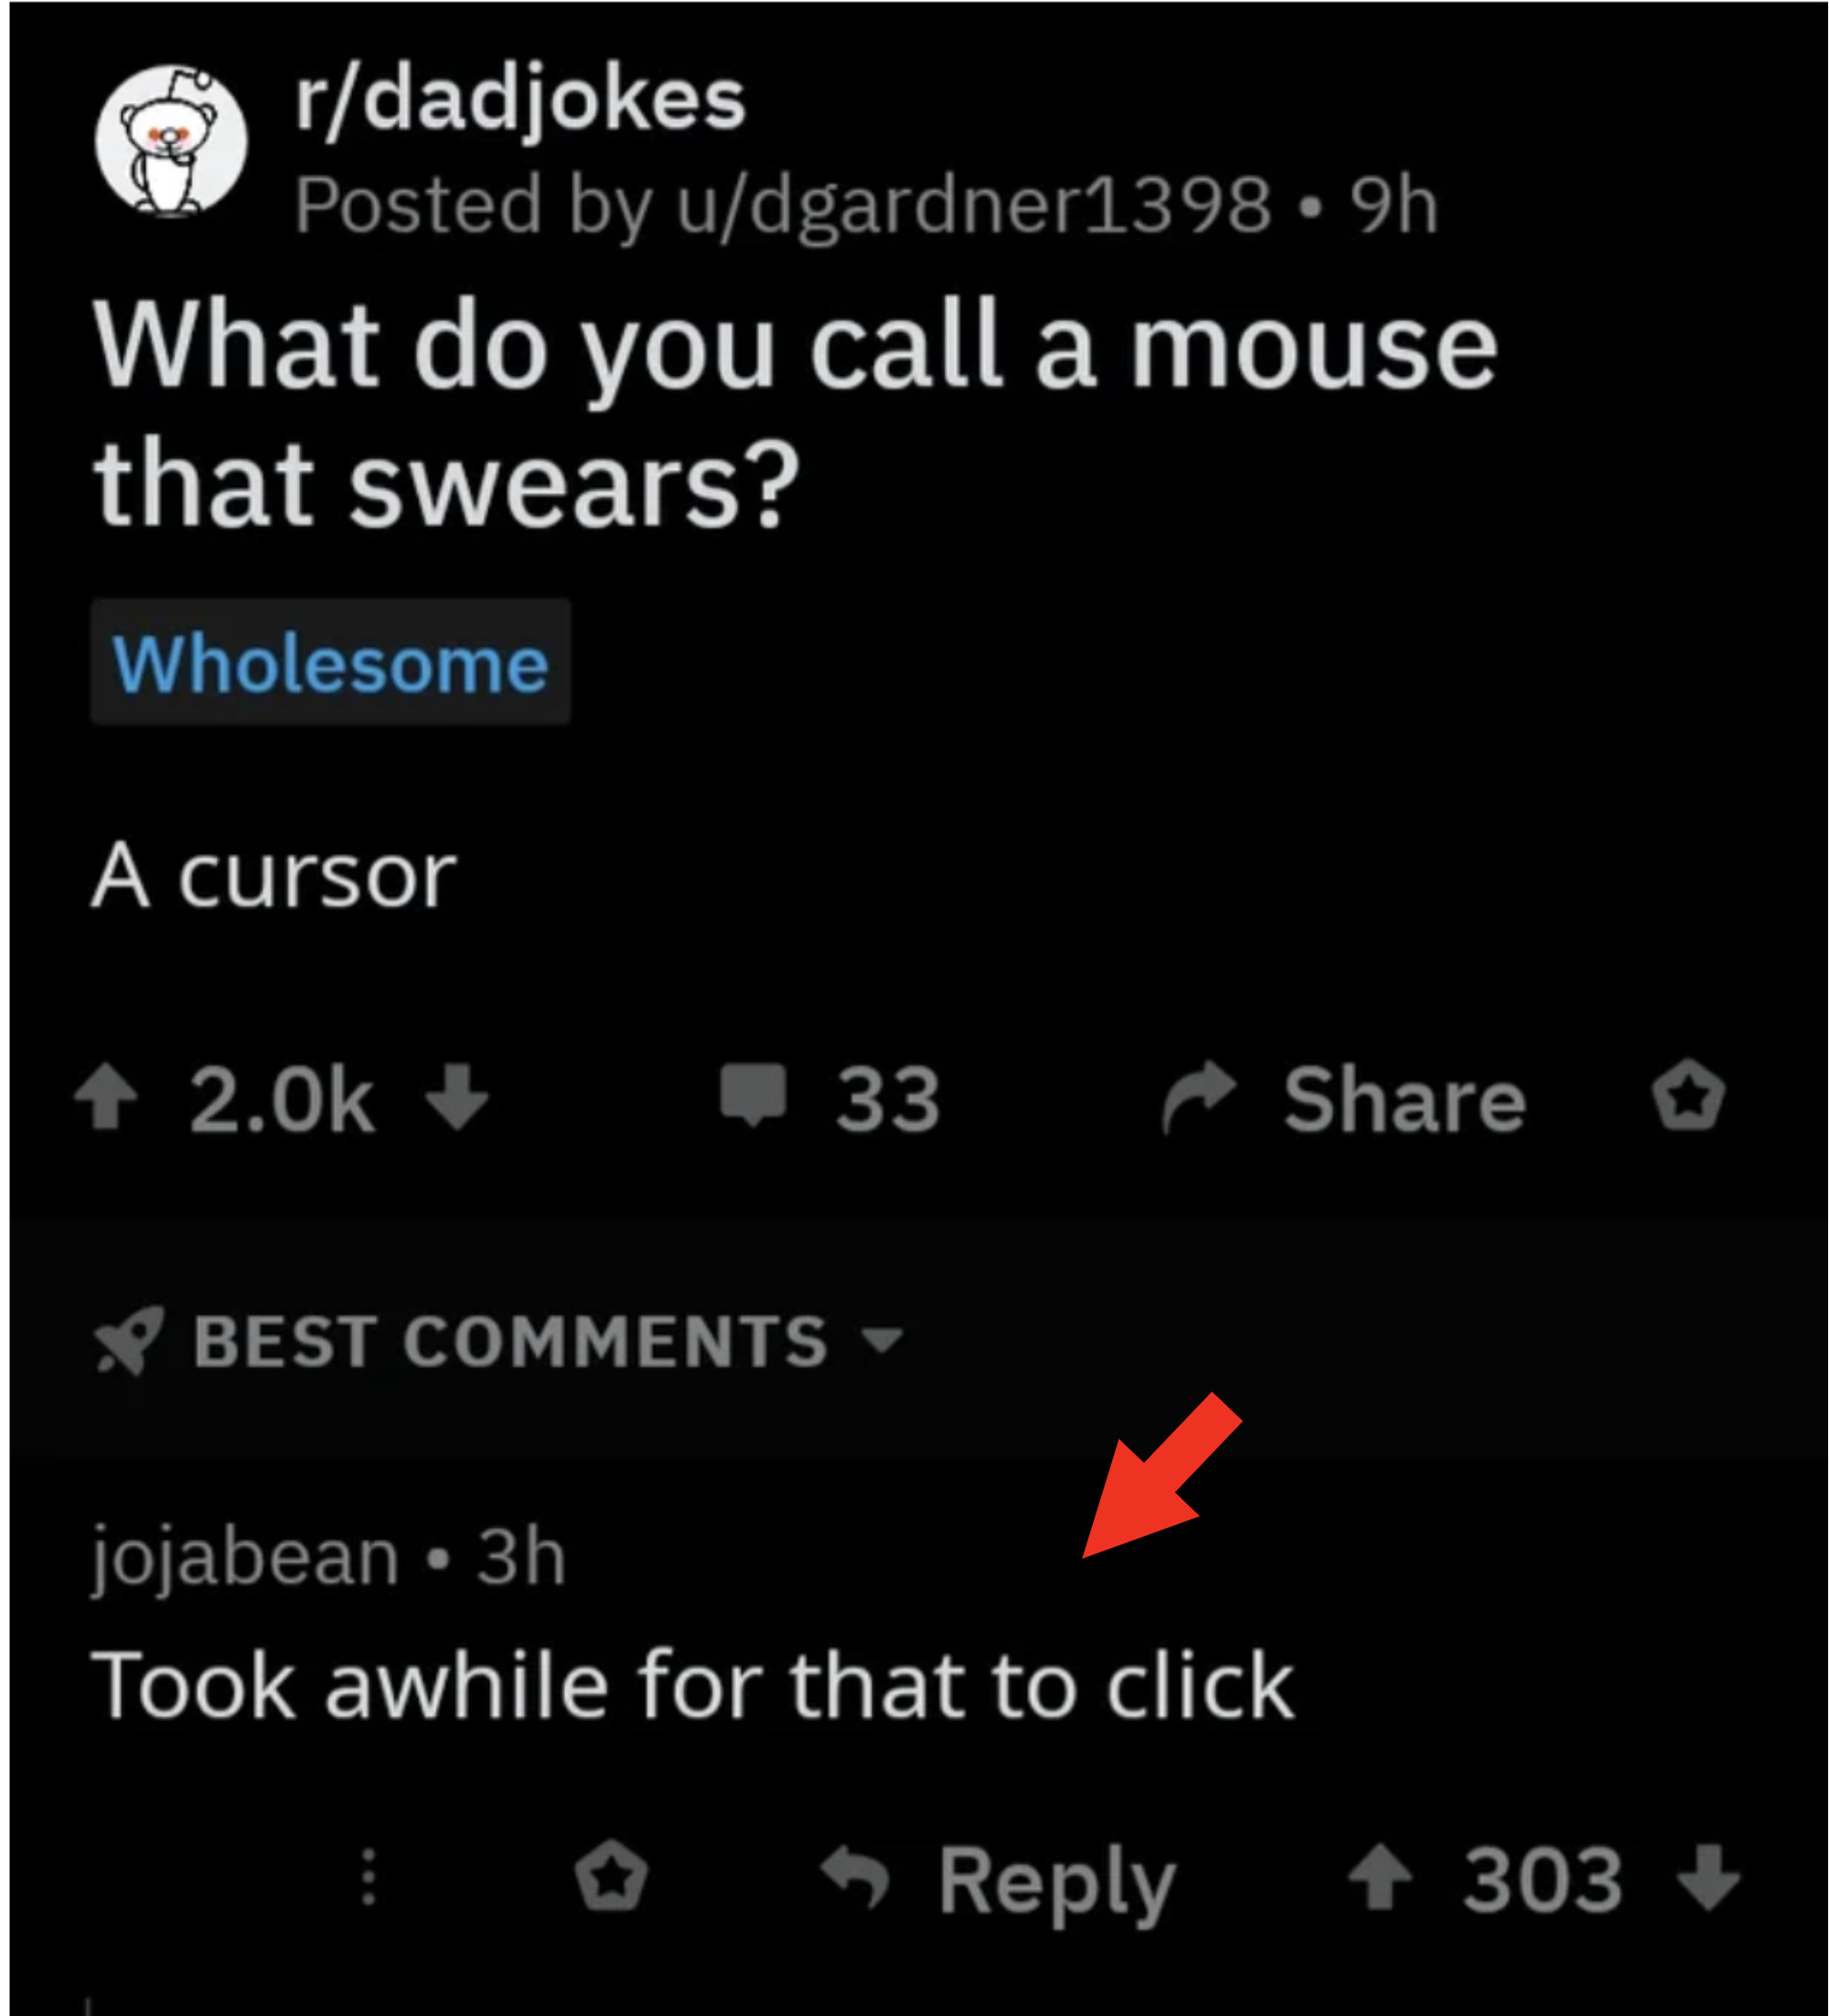 The joke says "What do you call a mouse that swears? A cursor" but spelled like the cursor of a computer mouse, and the commenter responds "took a while for that to click"